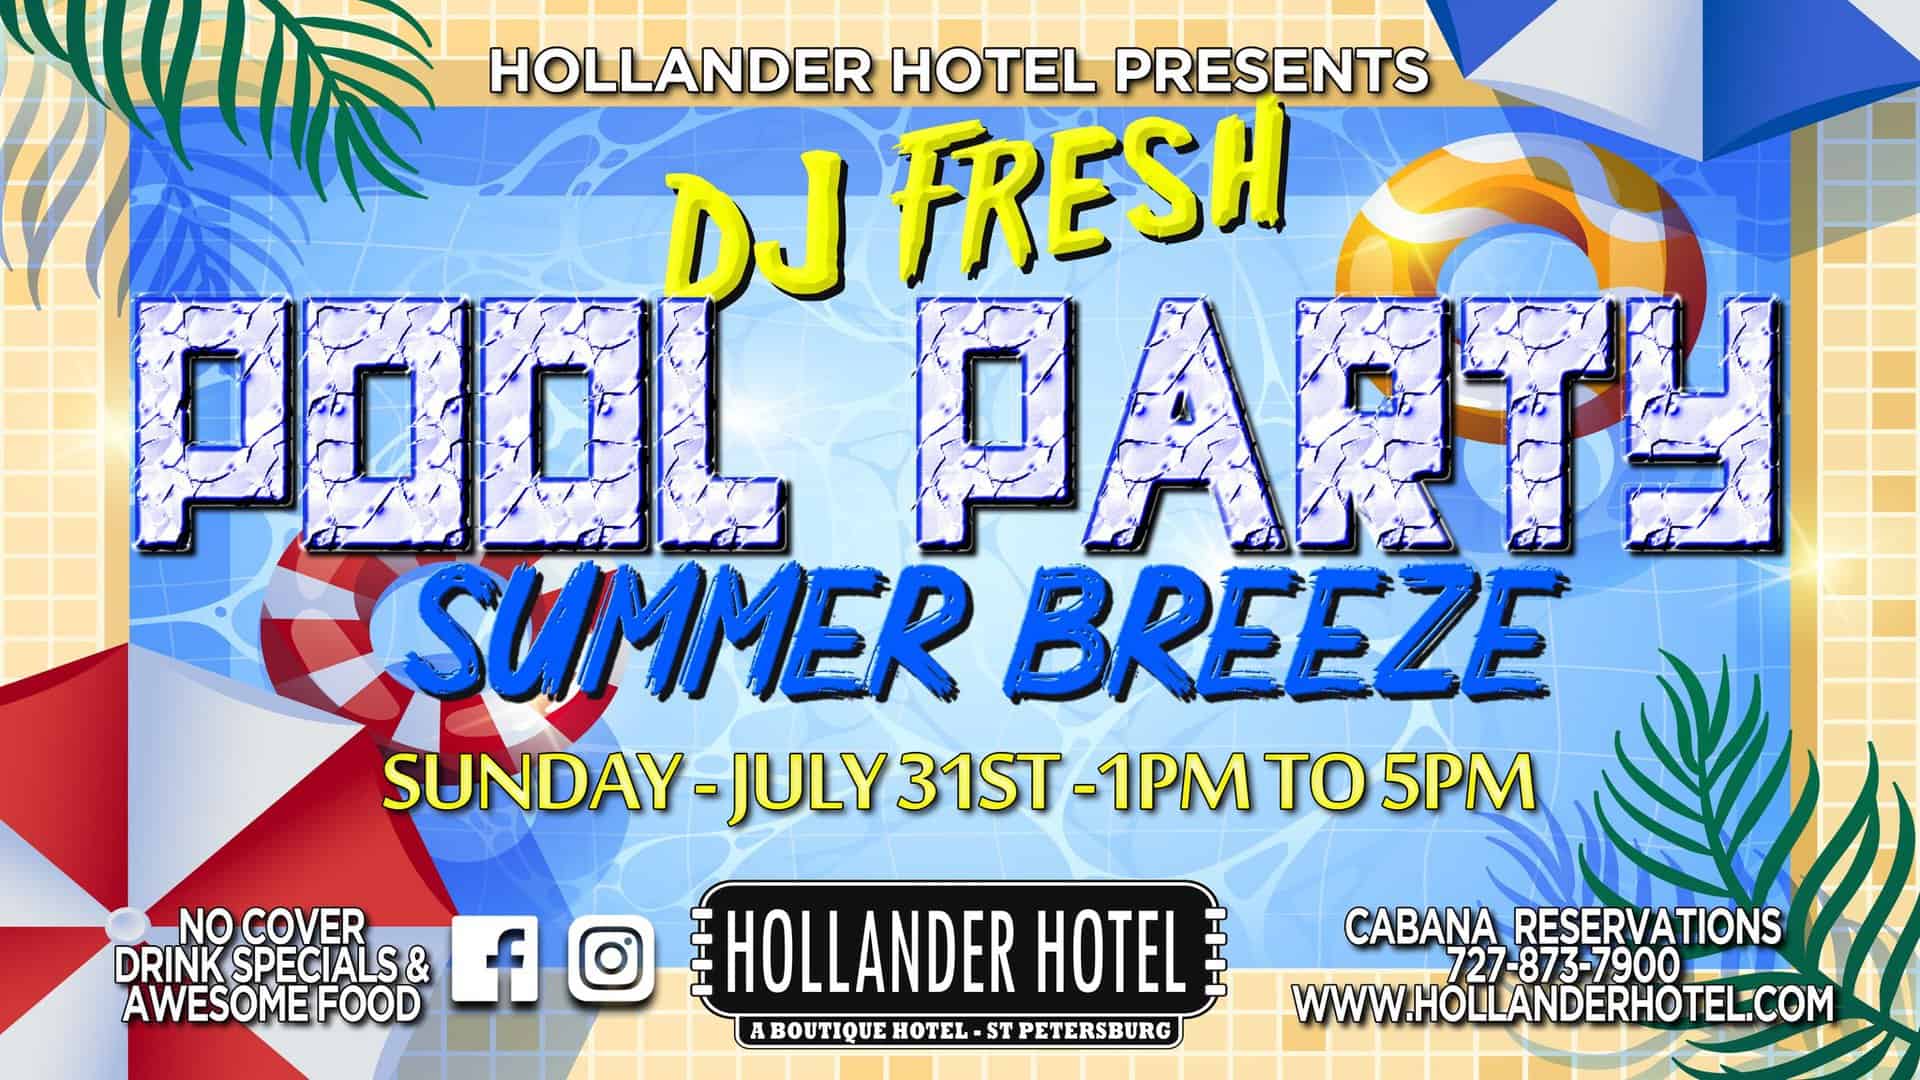 DJ Fresh Pool Party Summer Breeze July 31 1pm-5pm at the Hollander Hotel